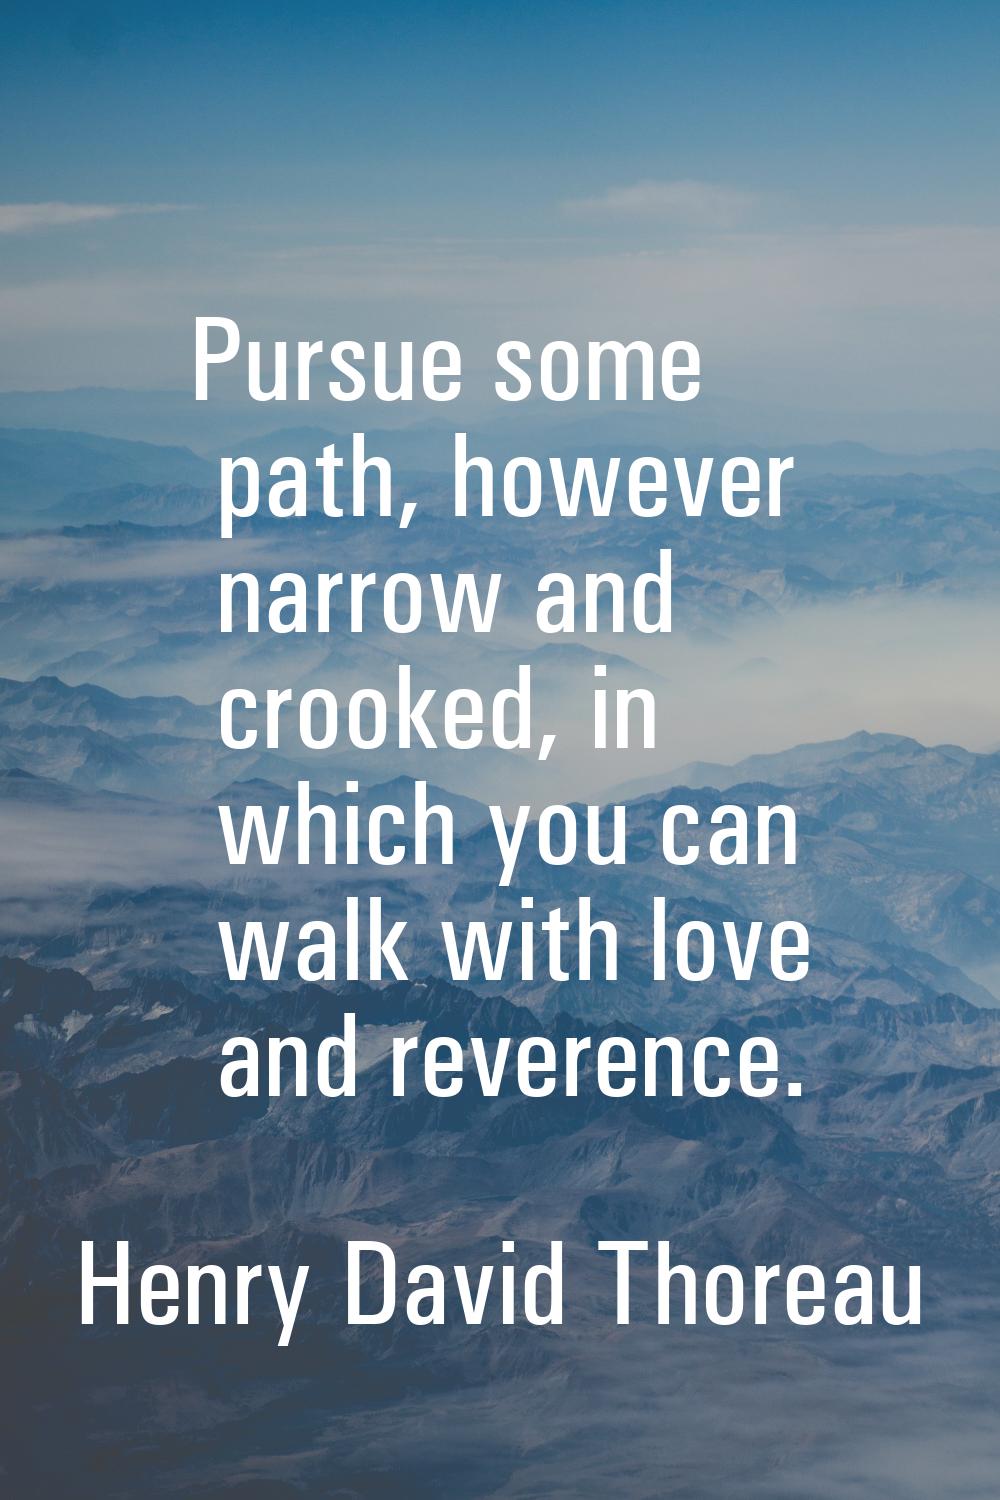 Pursue some path, however narrow and crooked, in which you can walk with love and reverence.